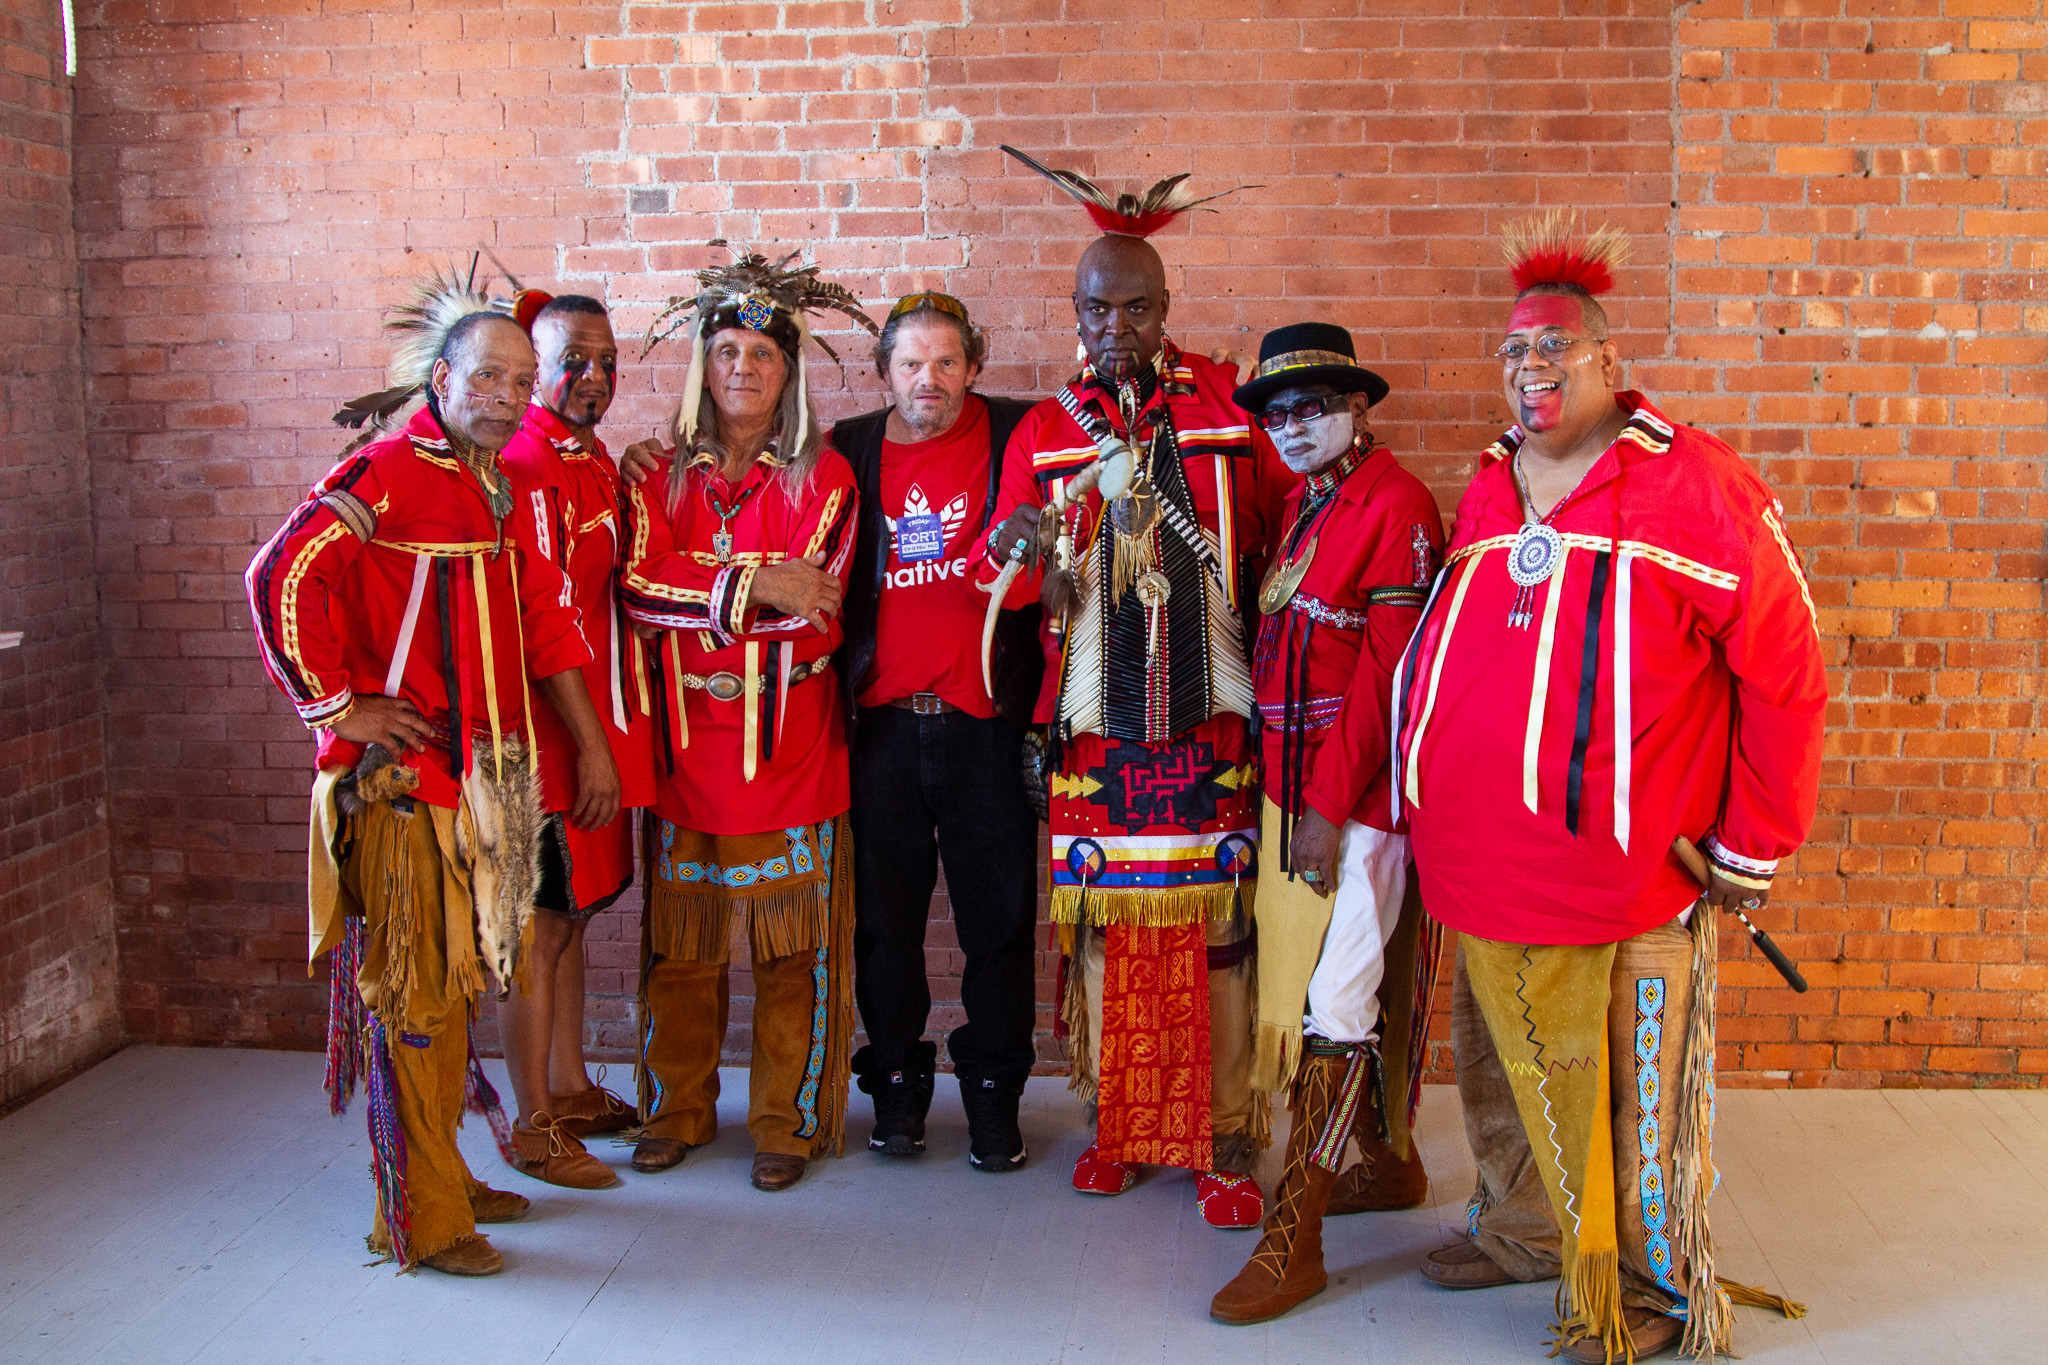 From left to right: Pawtucket resident Dean Running Deer Robinson of the Narragansett Tribe; Wayne Eagle Feather Williams of East Providence who is Seminole and Blackfoot; Danny Three Bears of North Attleboro, Mass. who is Métis; stage manager Joe Grey Badger who is of Cherokee descent; Walpole, Mass. resident Robert Two Running Elk Cox from the Pocasset Wampanoag Tribe of Pokanoket Nation, Providence resident David Gray Owl Jennings from the Pocasset Wampanoag Tribe of Pokanoket Nation; Woonsocket resident Daryl Black Eagle Jamieson from the Pocasset Wampanoag Tribe of Pokanoket Nation.